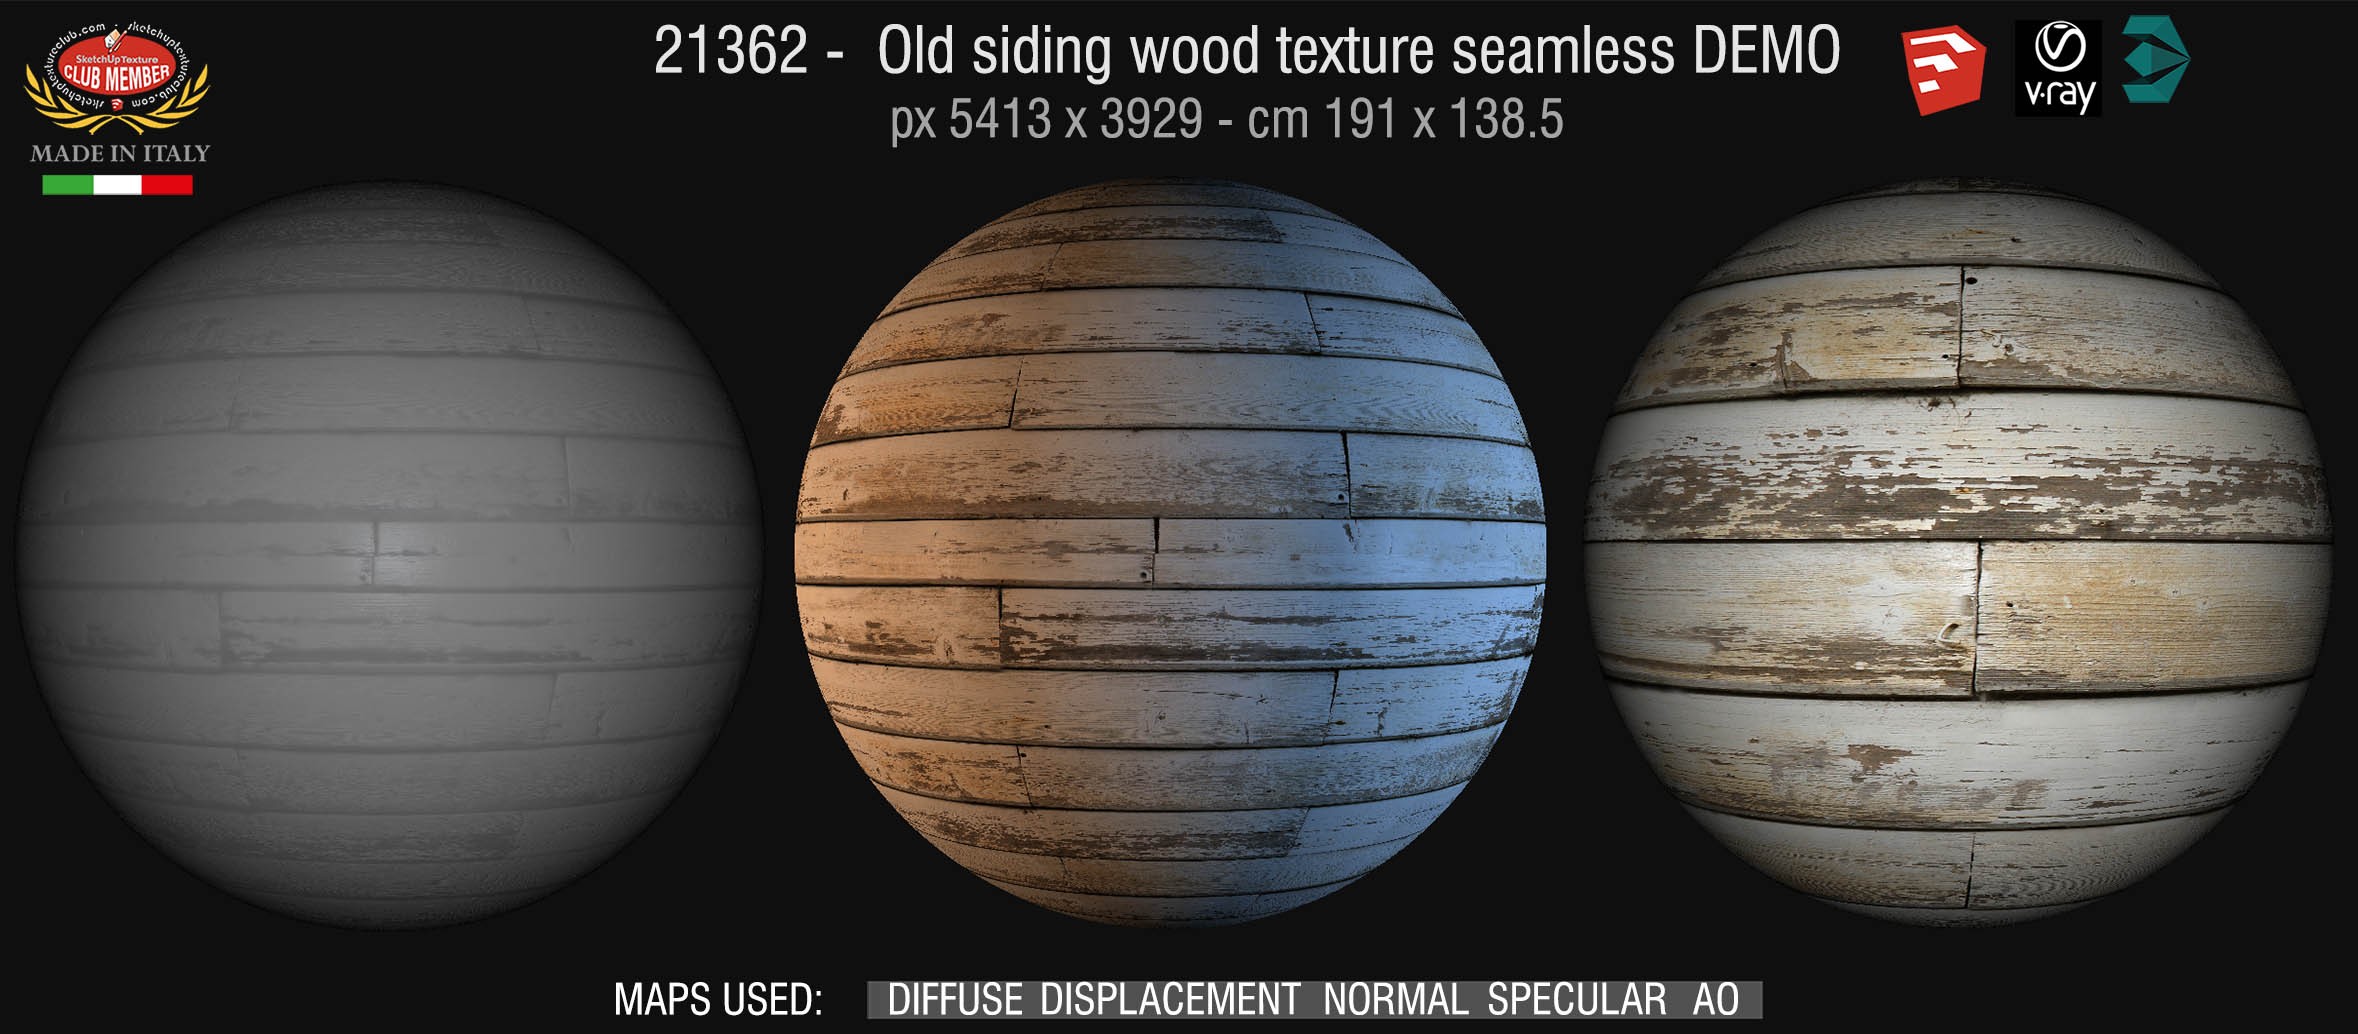 21362 HR Old Siding wood texture seamless + maps DEMO